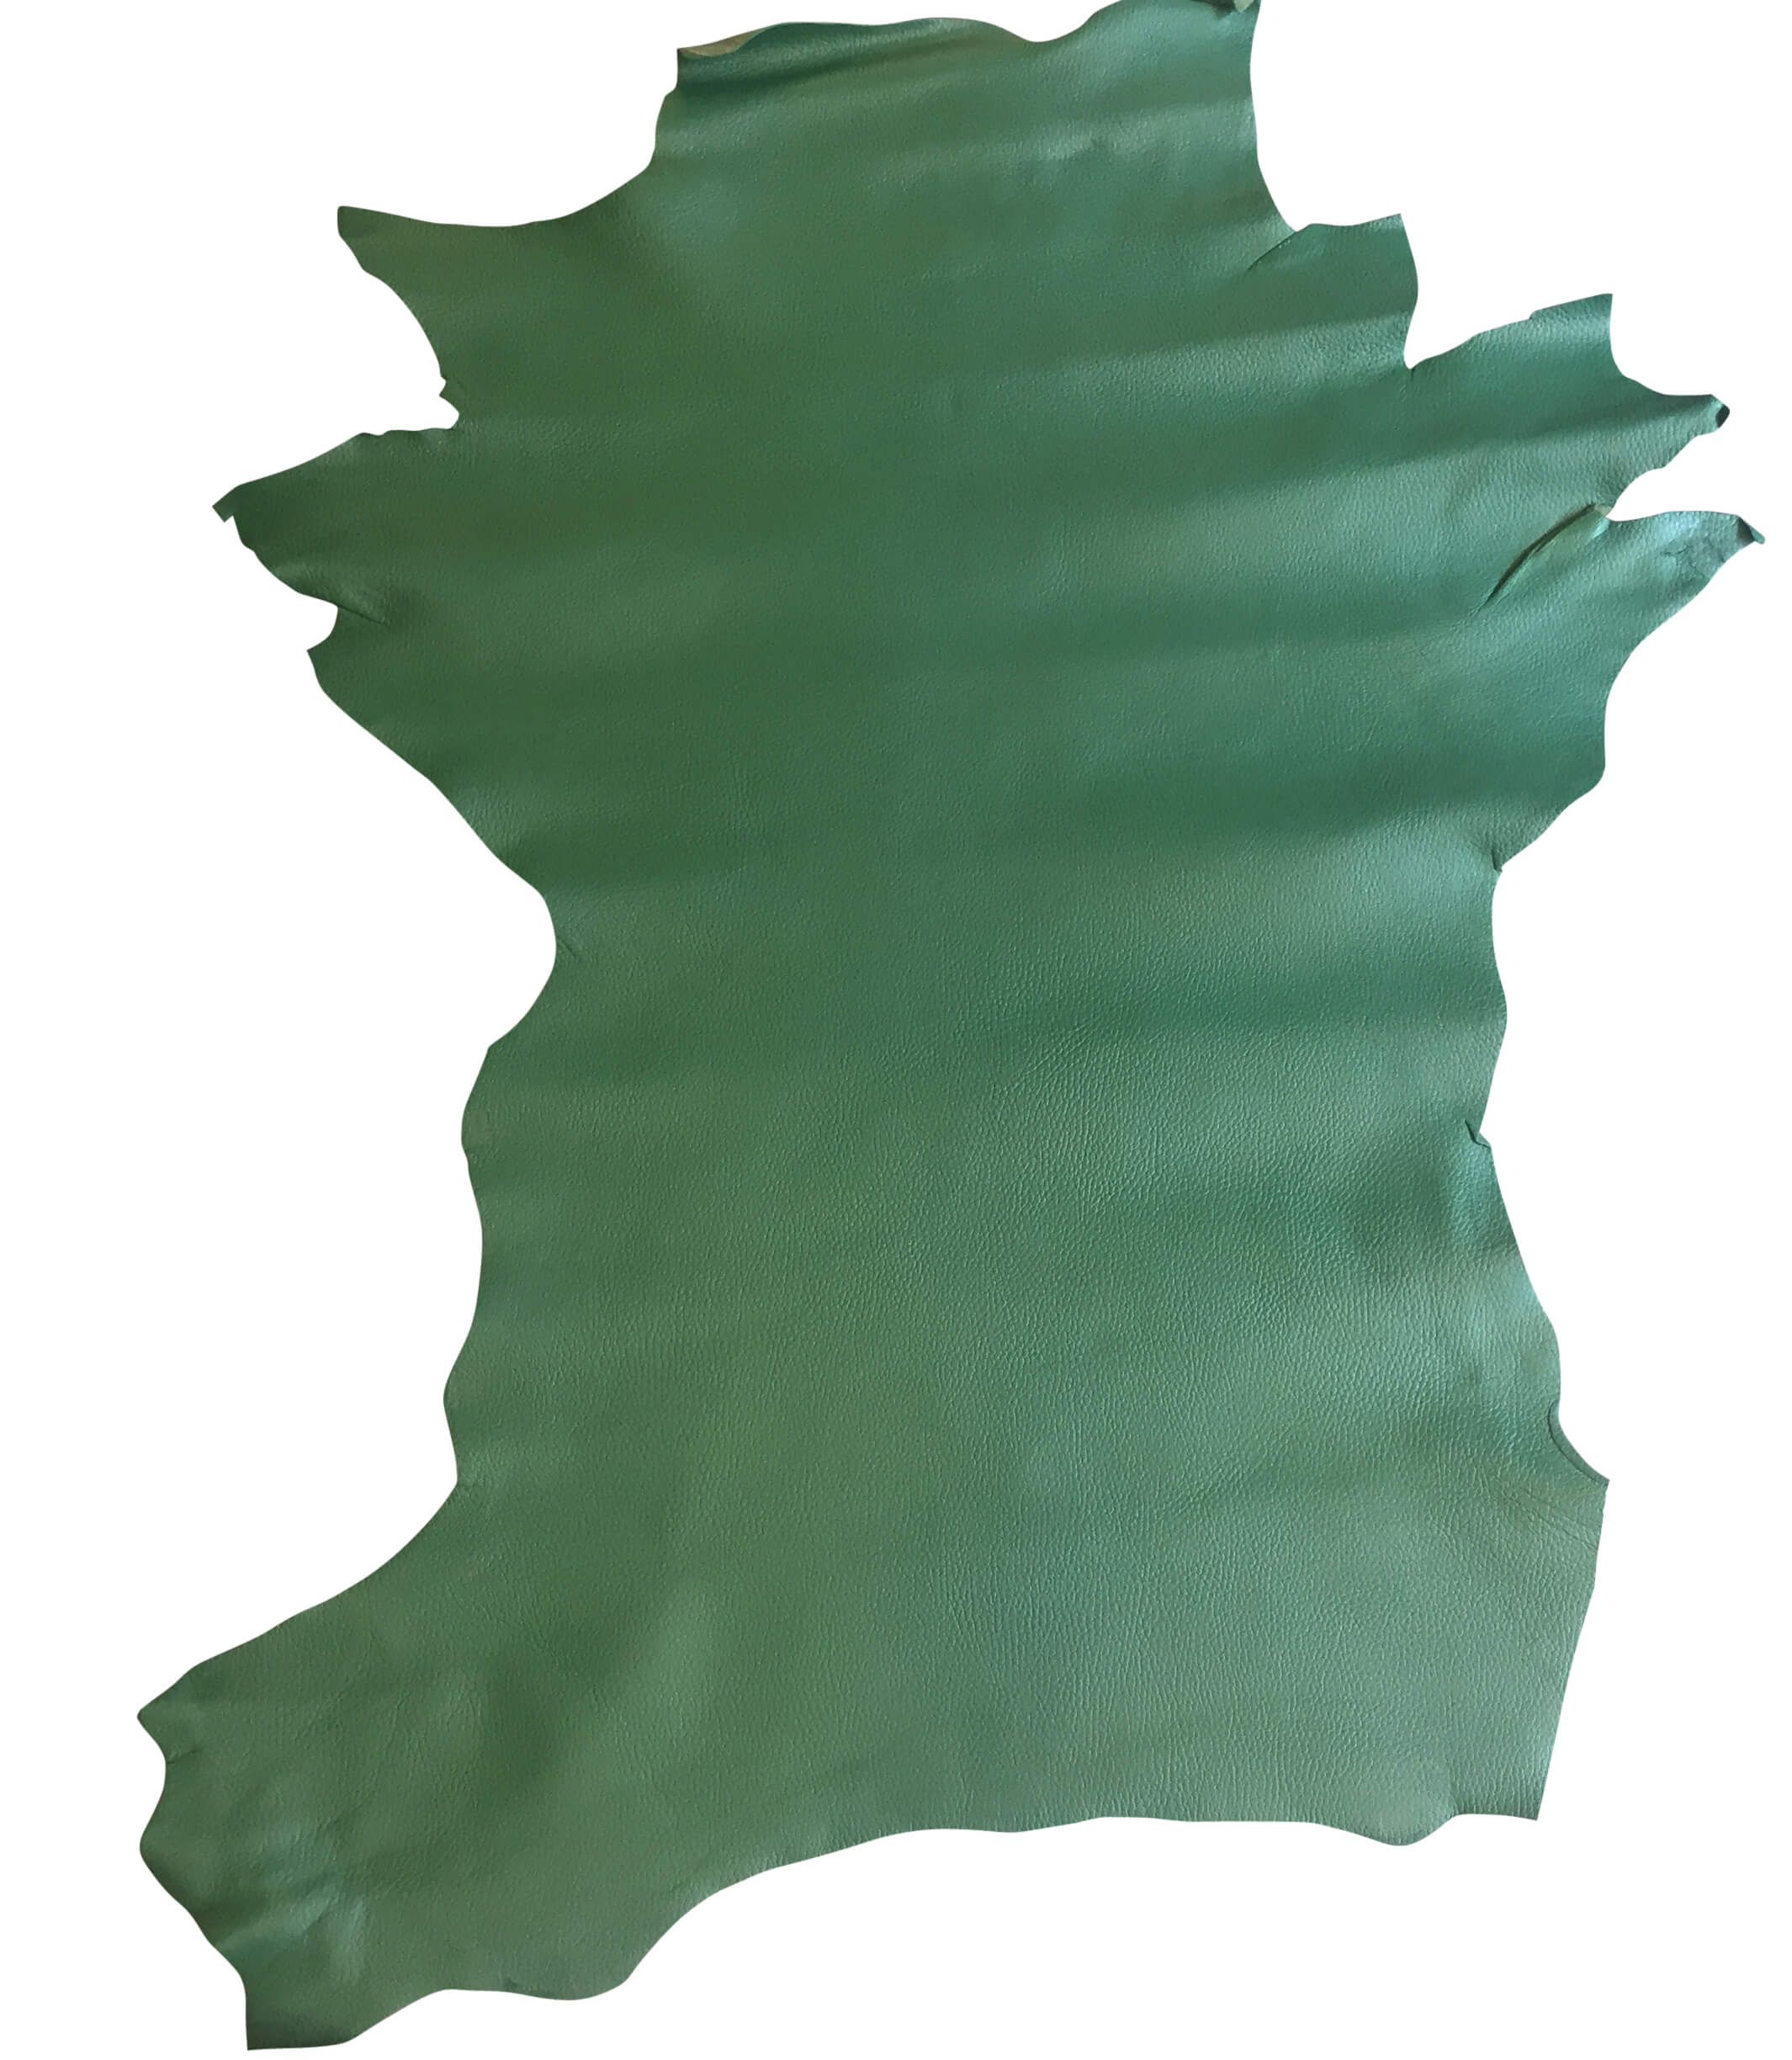 Green Genuine leather hides for Upholstery